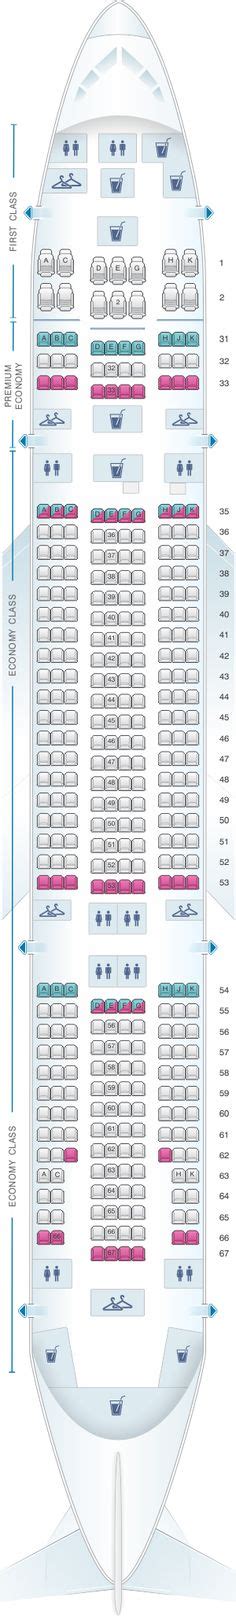 Turkish Airlines Boeing Seat Map